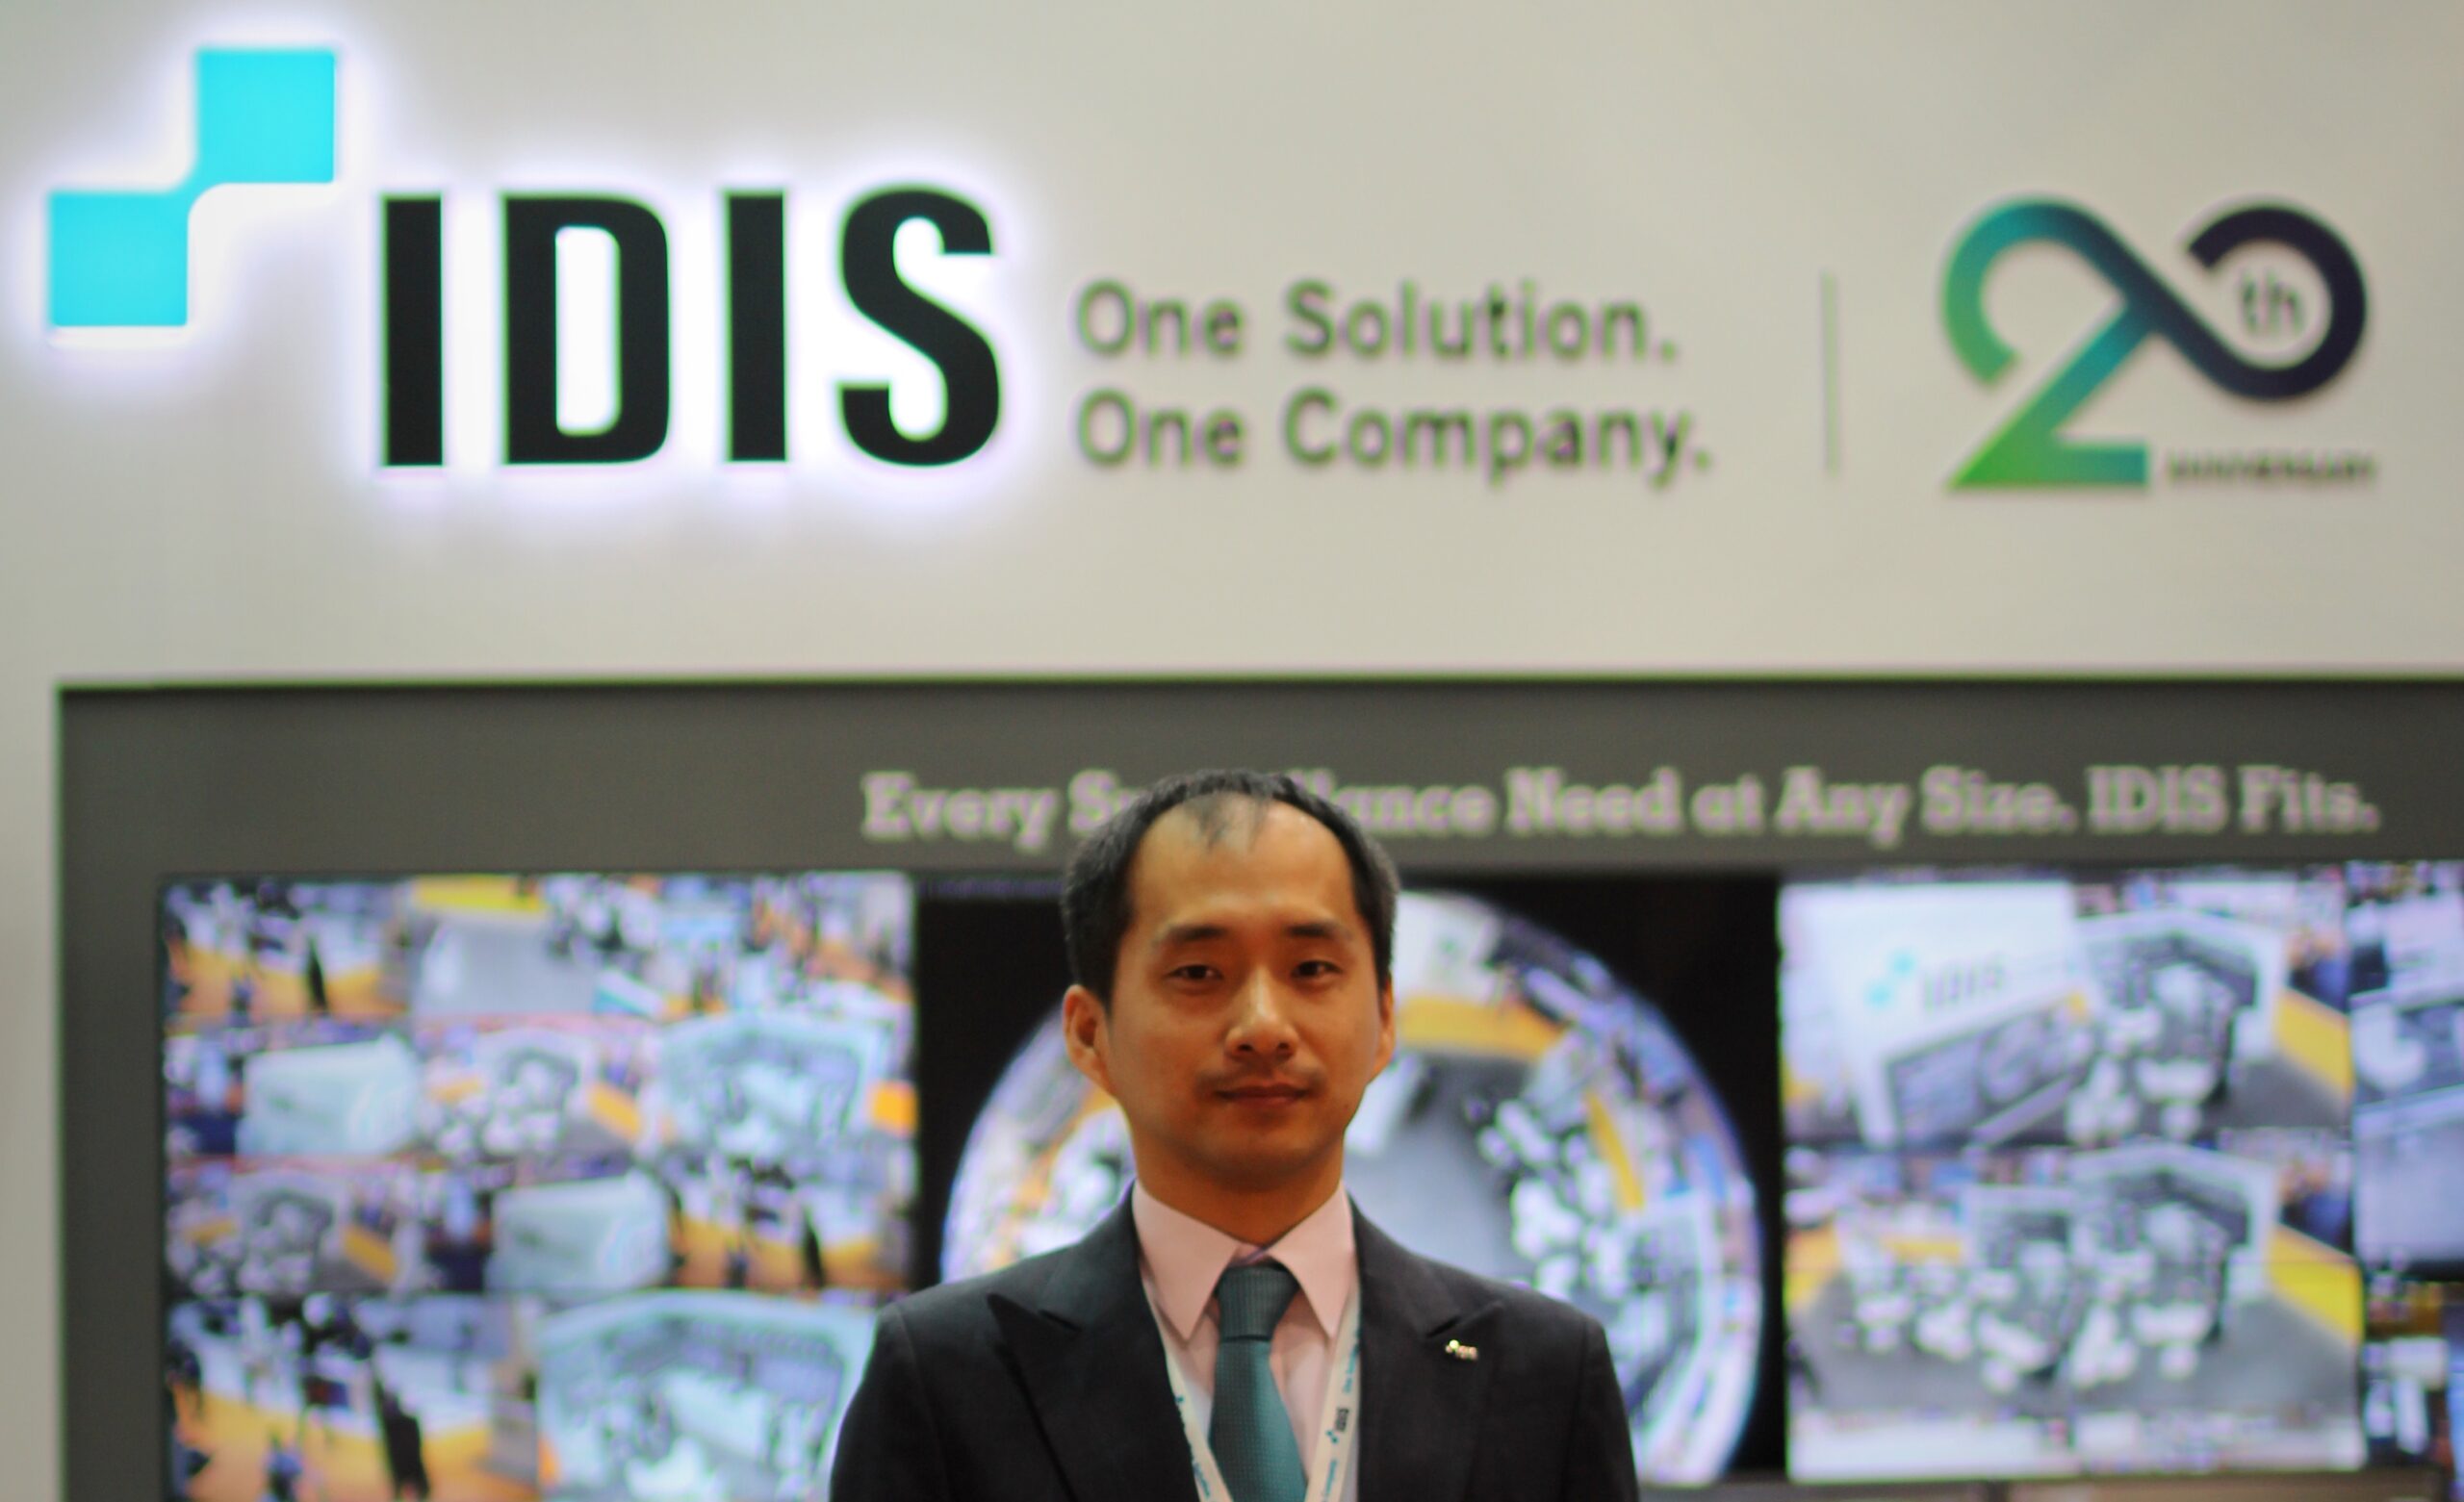 IDIS EXPANDS ENTERPRISE RANGE WITH THE LAUNCH OF A NEW 64-CHANNEL NVR. Credit: IDIS